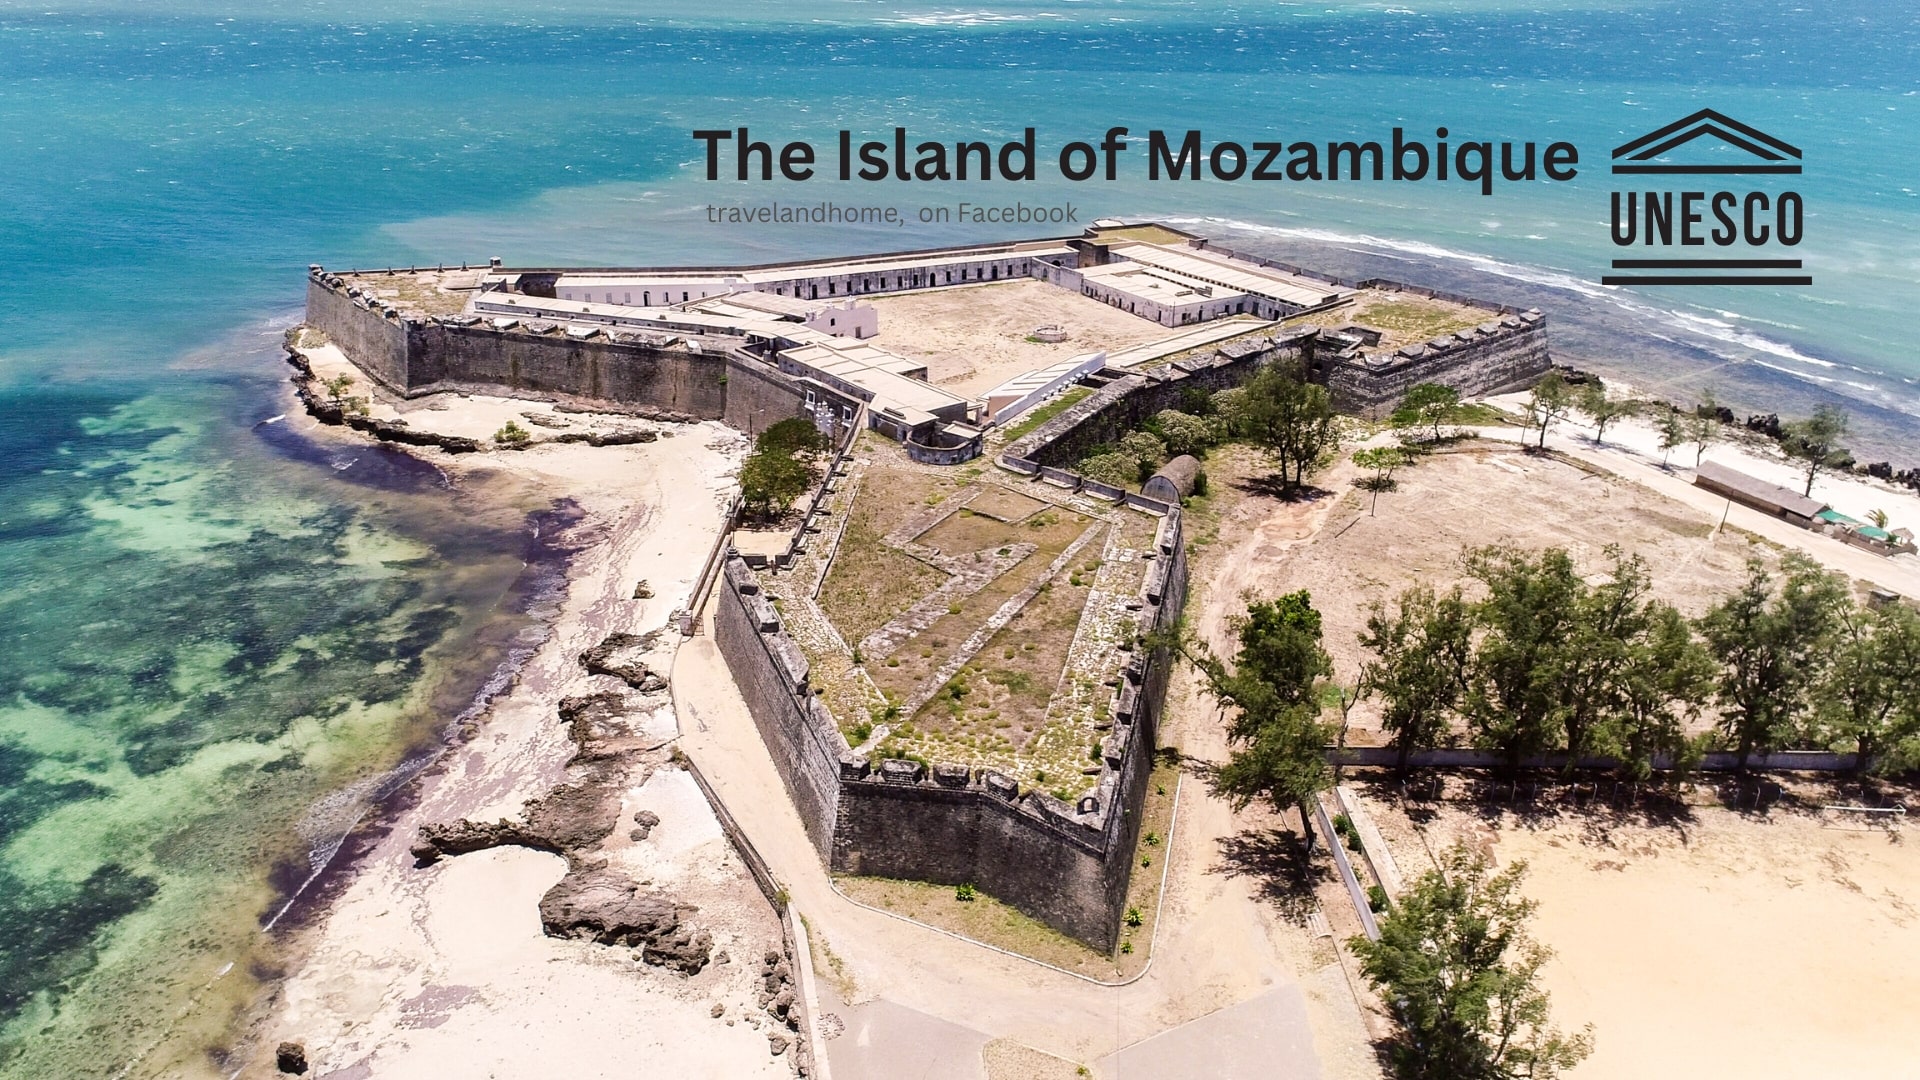 Island of Mozambique, fortified city, UNESCO World Heritage Site min